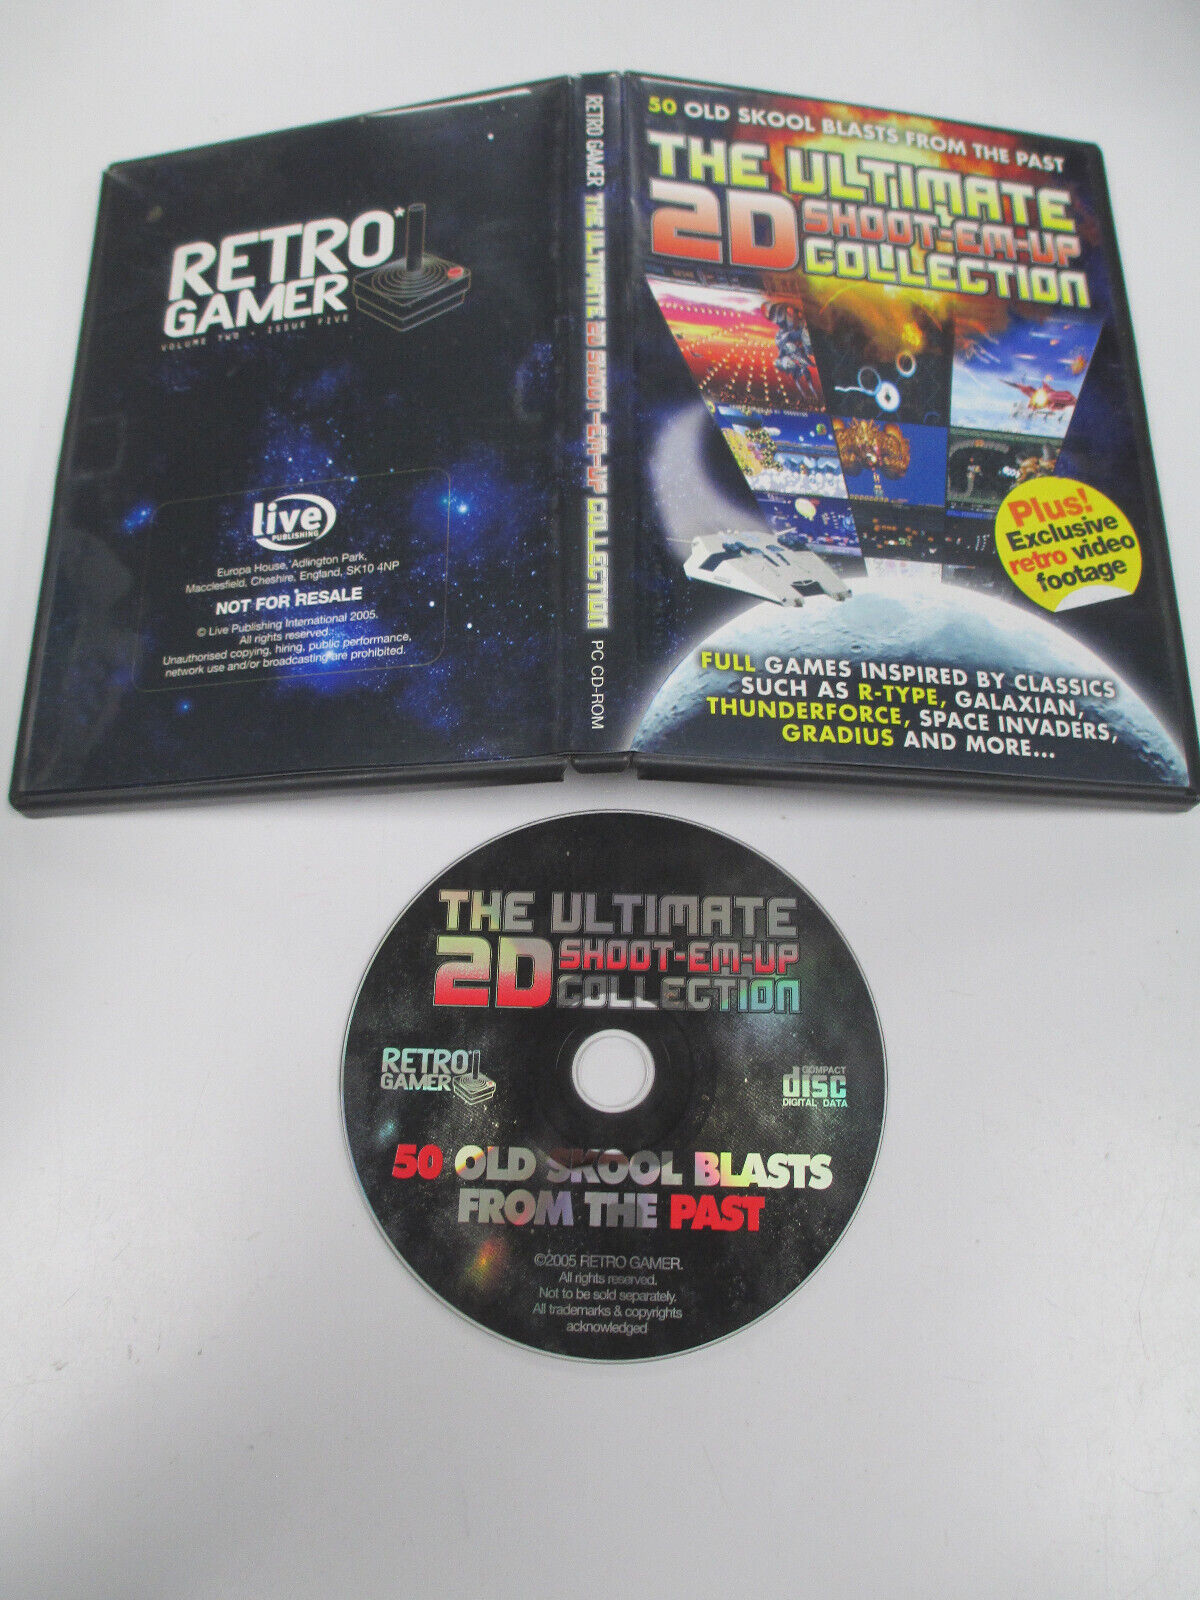 Retro Gamer Volume 2 Issue 5 Cover Disc: 2d Shoot-Em-Up Collection (PC, 2005)